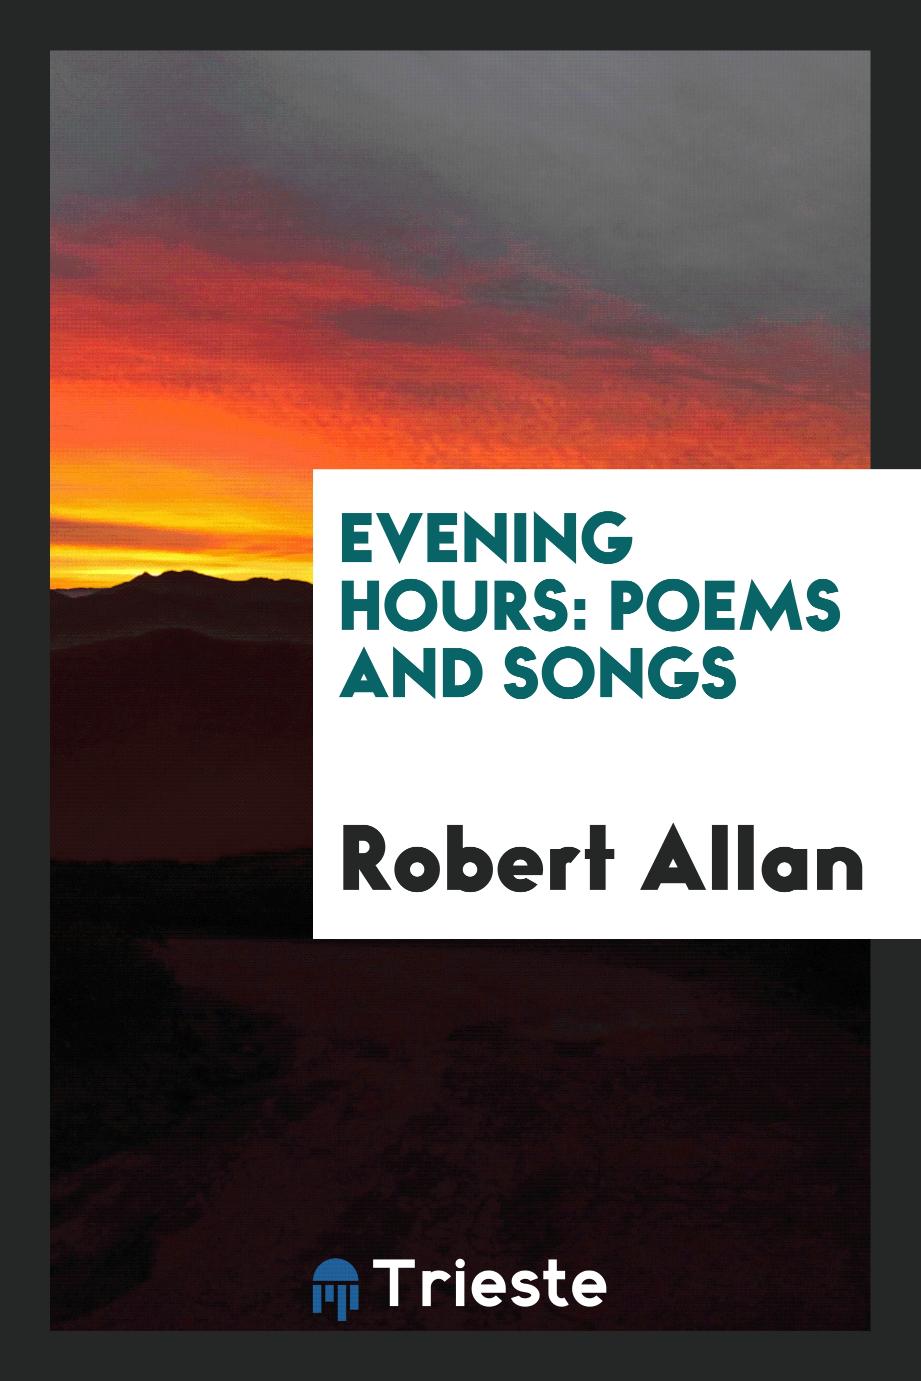 Evening hours: poems and songs